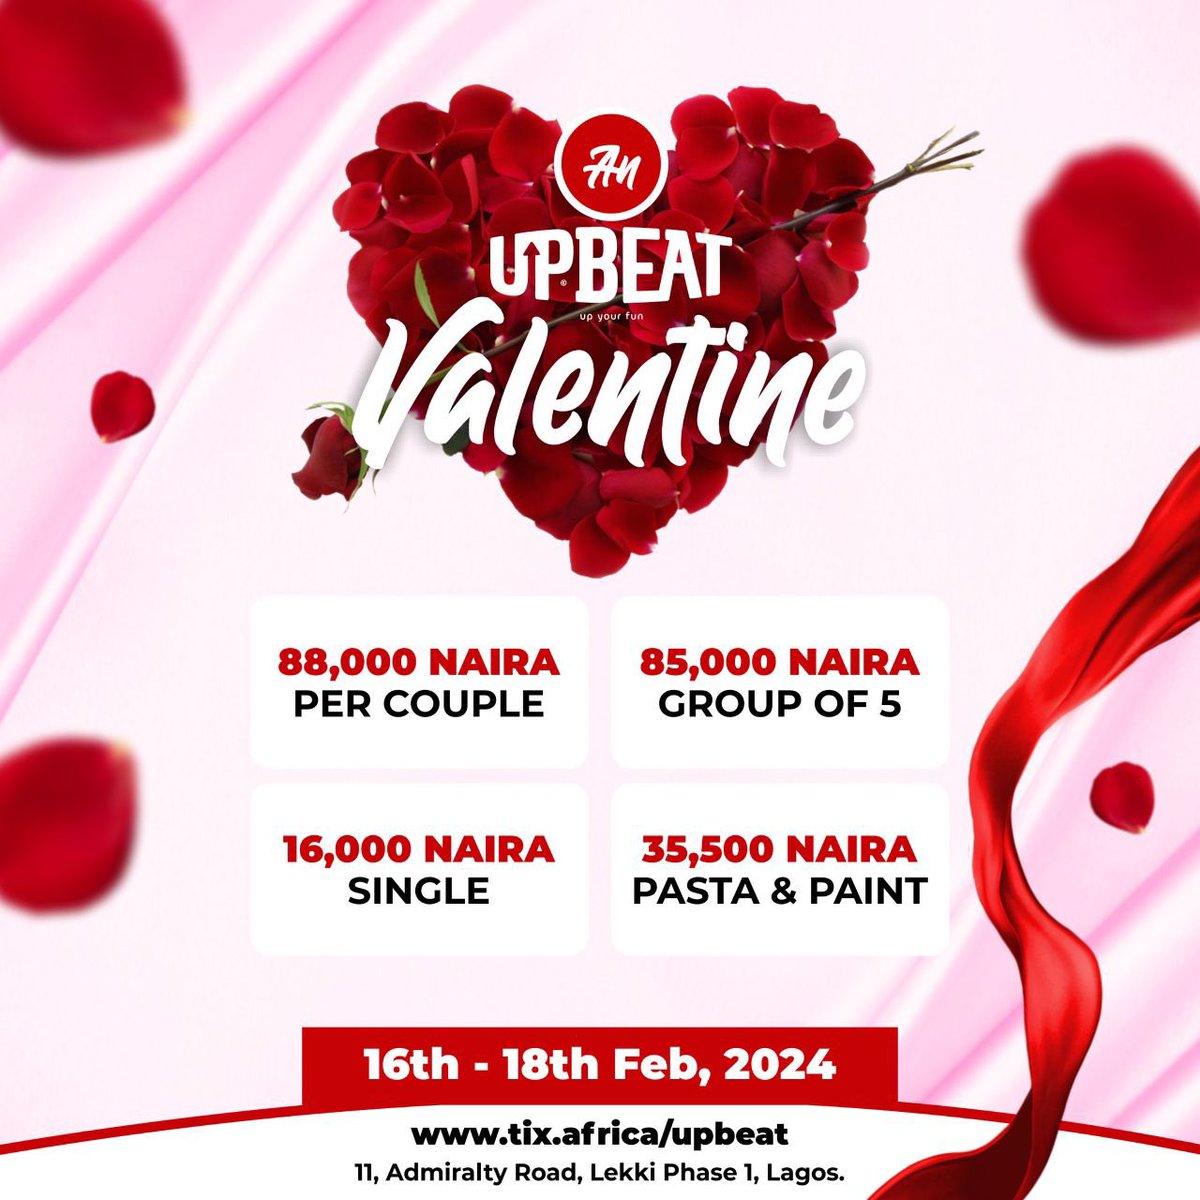 There are amazing activities and packages that are curated specifically  for lovers, singles, and group of friends at the @UpbeatCentre this Valentine season! 

You can also gift your friends and loved ones. 

#AnUpBeatValentine

tix.africa/upbeat